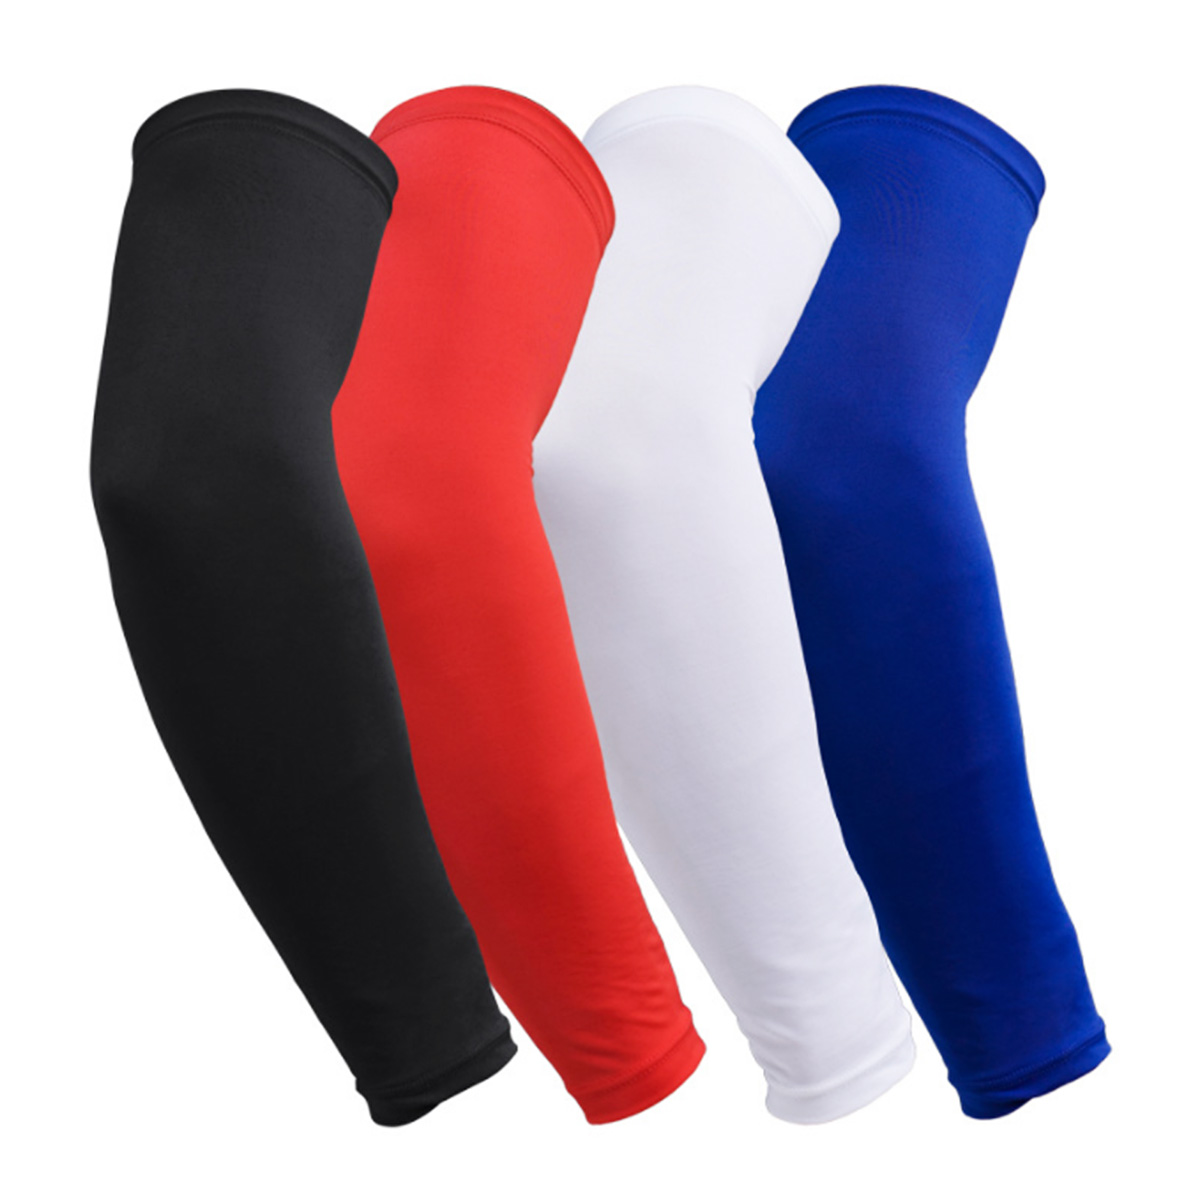 Thandizo la Polyester Arm Sleeves Elbow Support